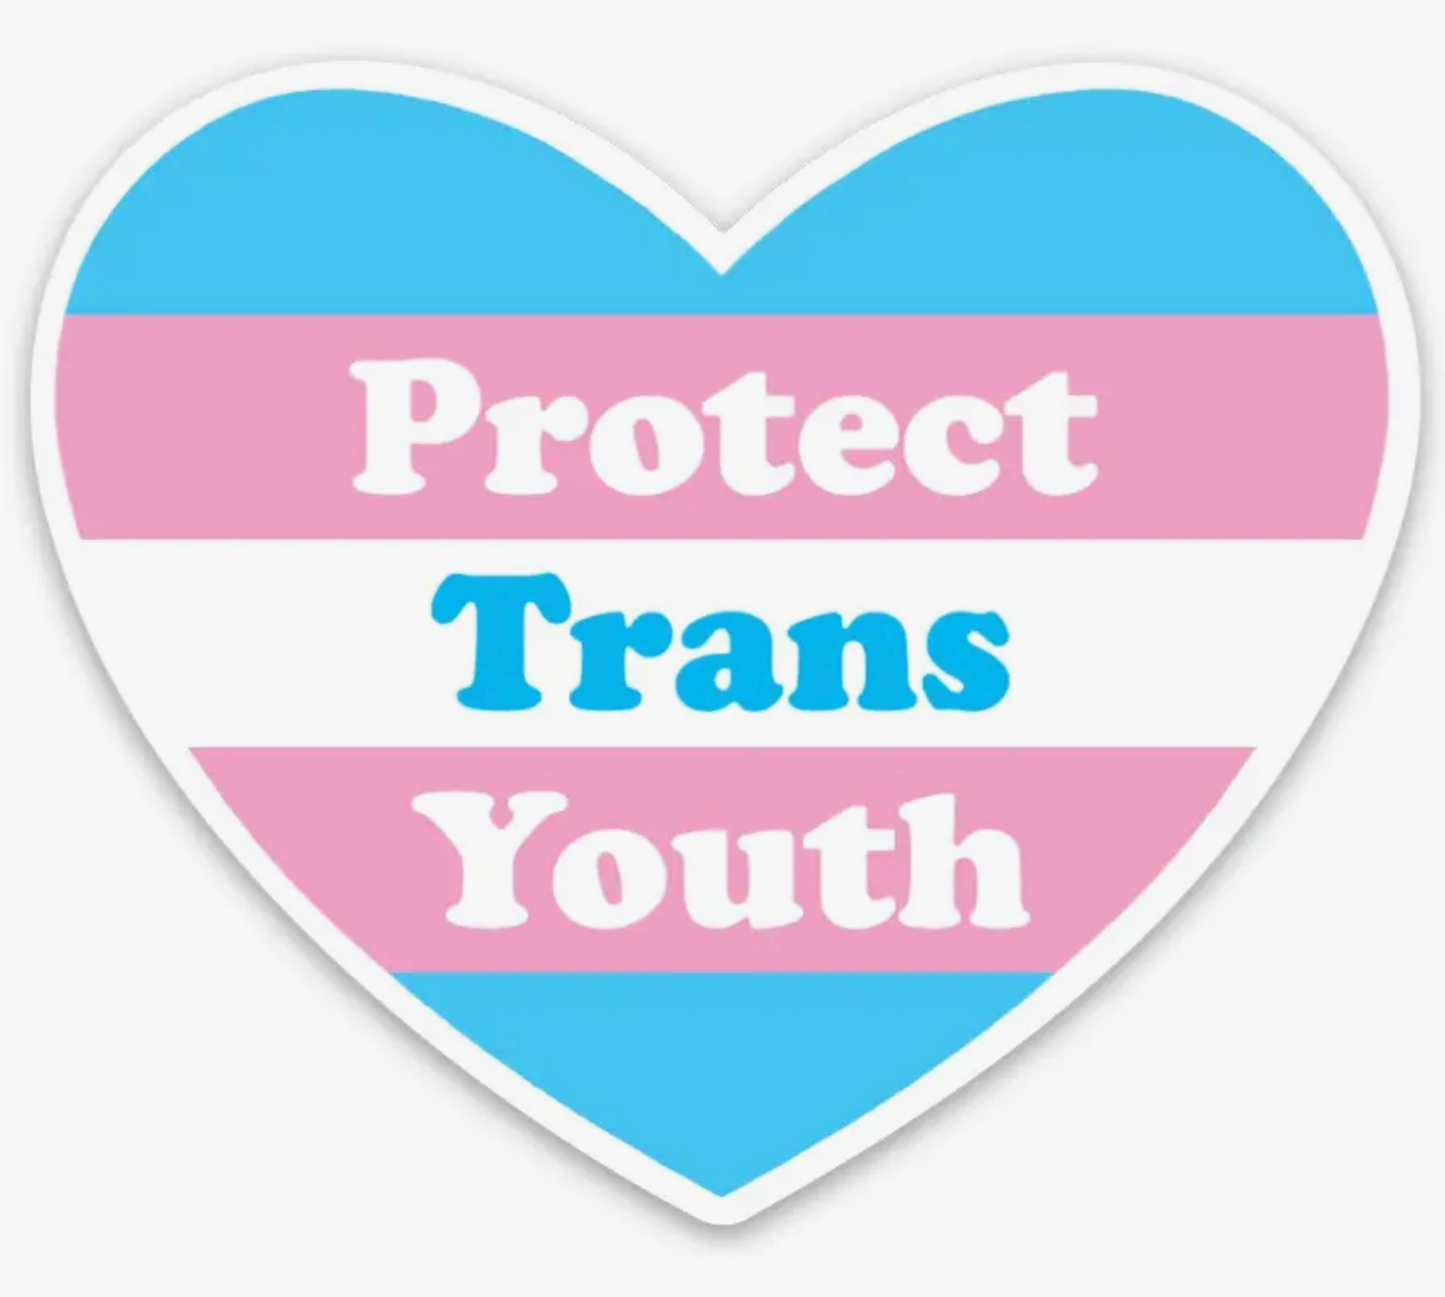 Protect Trans Youth Heart Sticker